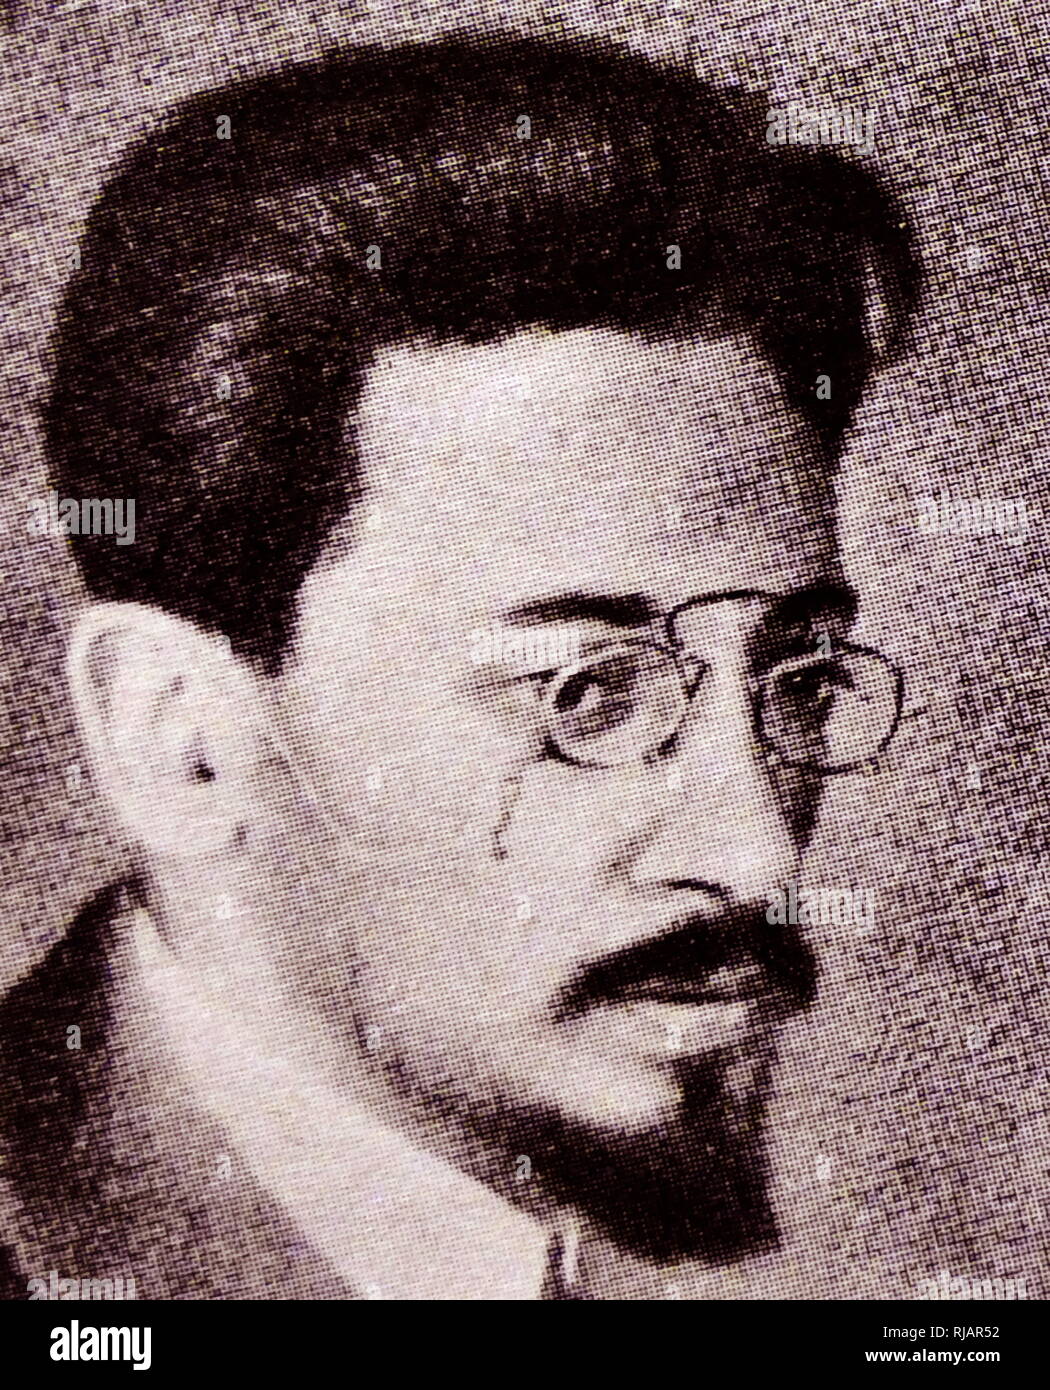 Yaakov Sverdlov (1885 – 1919); Bolshevik party administrator and chairman of the All-Russian Central Executive Committee. After the 1917 February Revolution Sverdlov returned to Petrograd from exile and was re-elected to the Central Committee of the Communist Party. He played an important role in planning the October Revolution. A number of sources claim that Sverdlov played a major role in the execution of Tsar Nicholas II and his family on 17 July 1918. He is buried in the Kremlin Wall Necropolis, in Moscow. Stock Photo